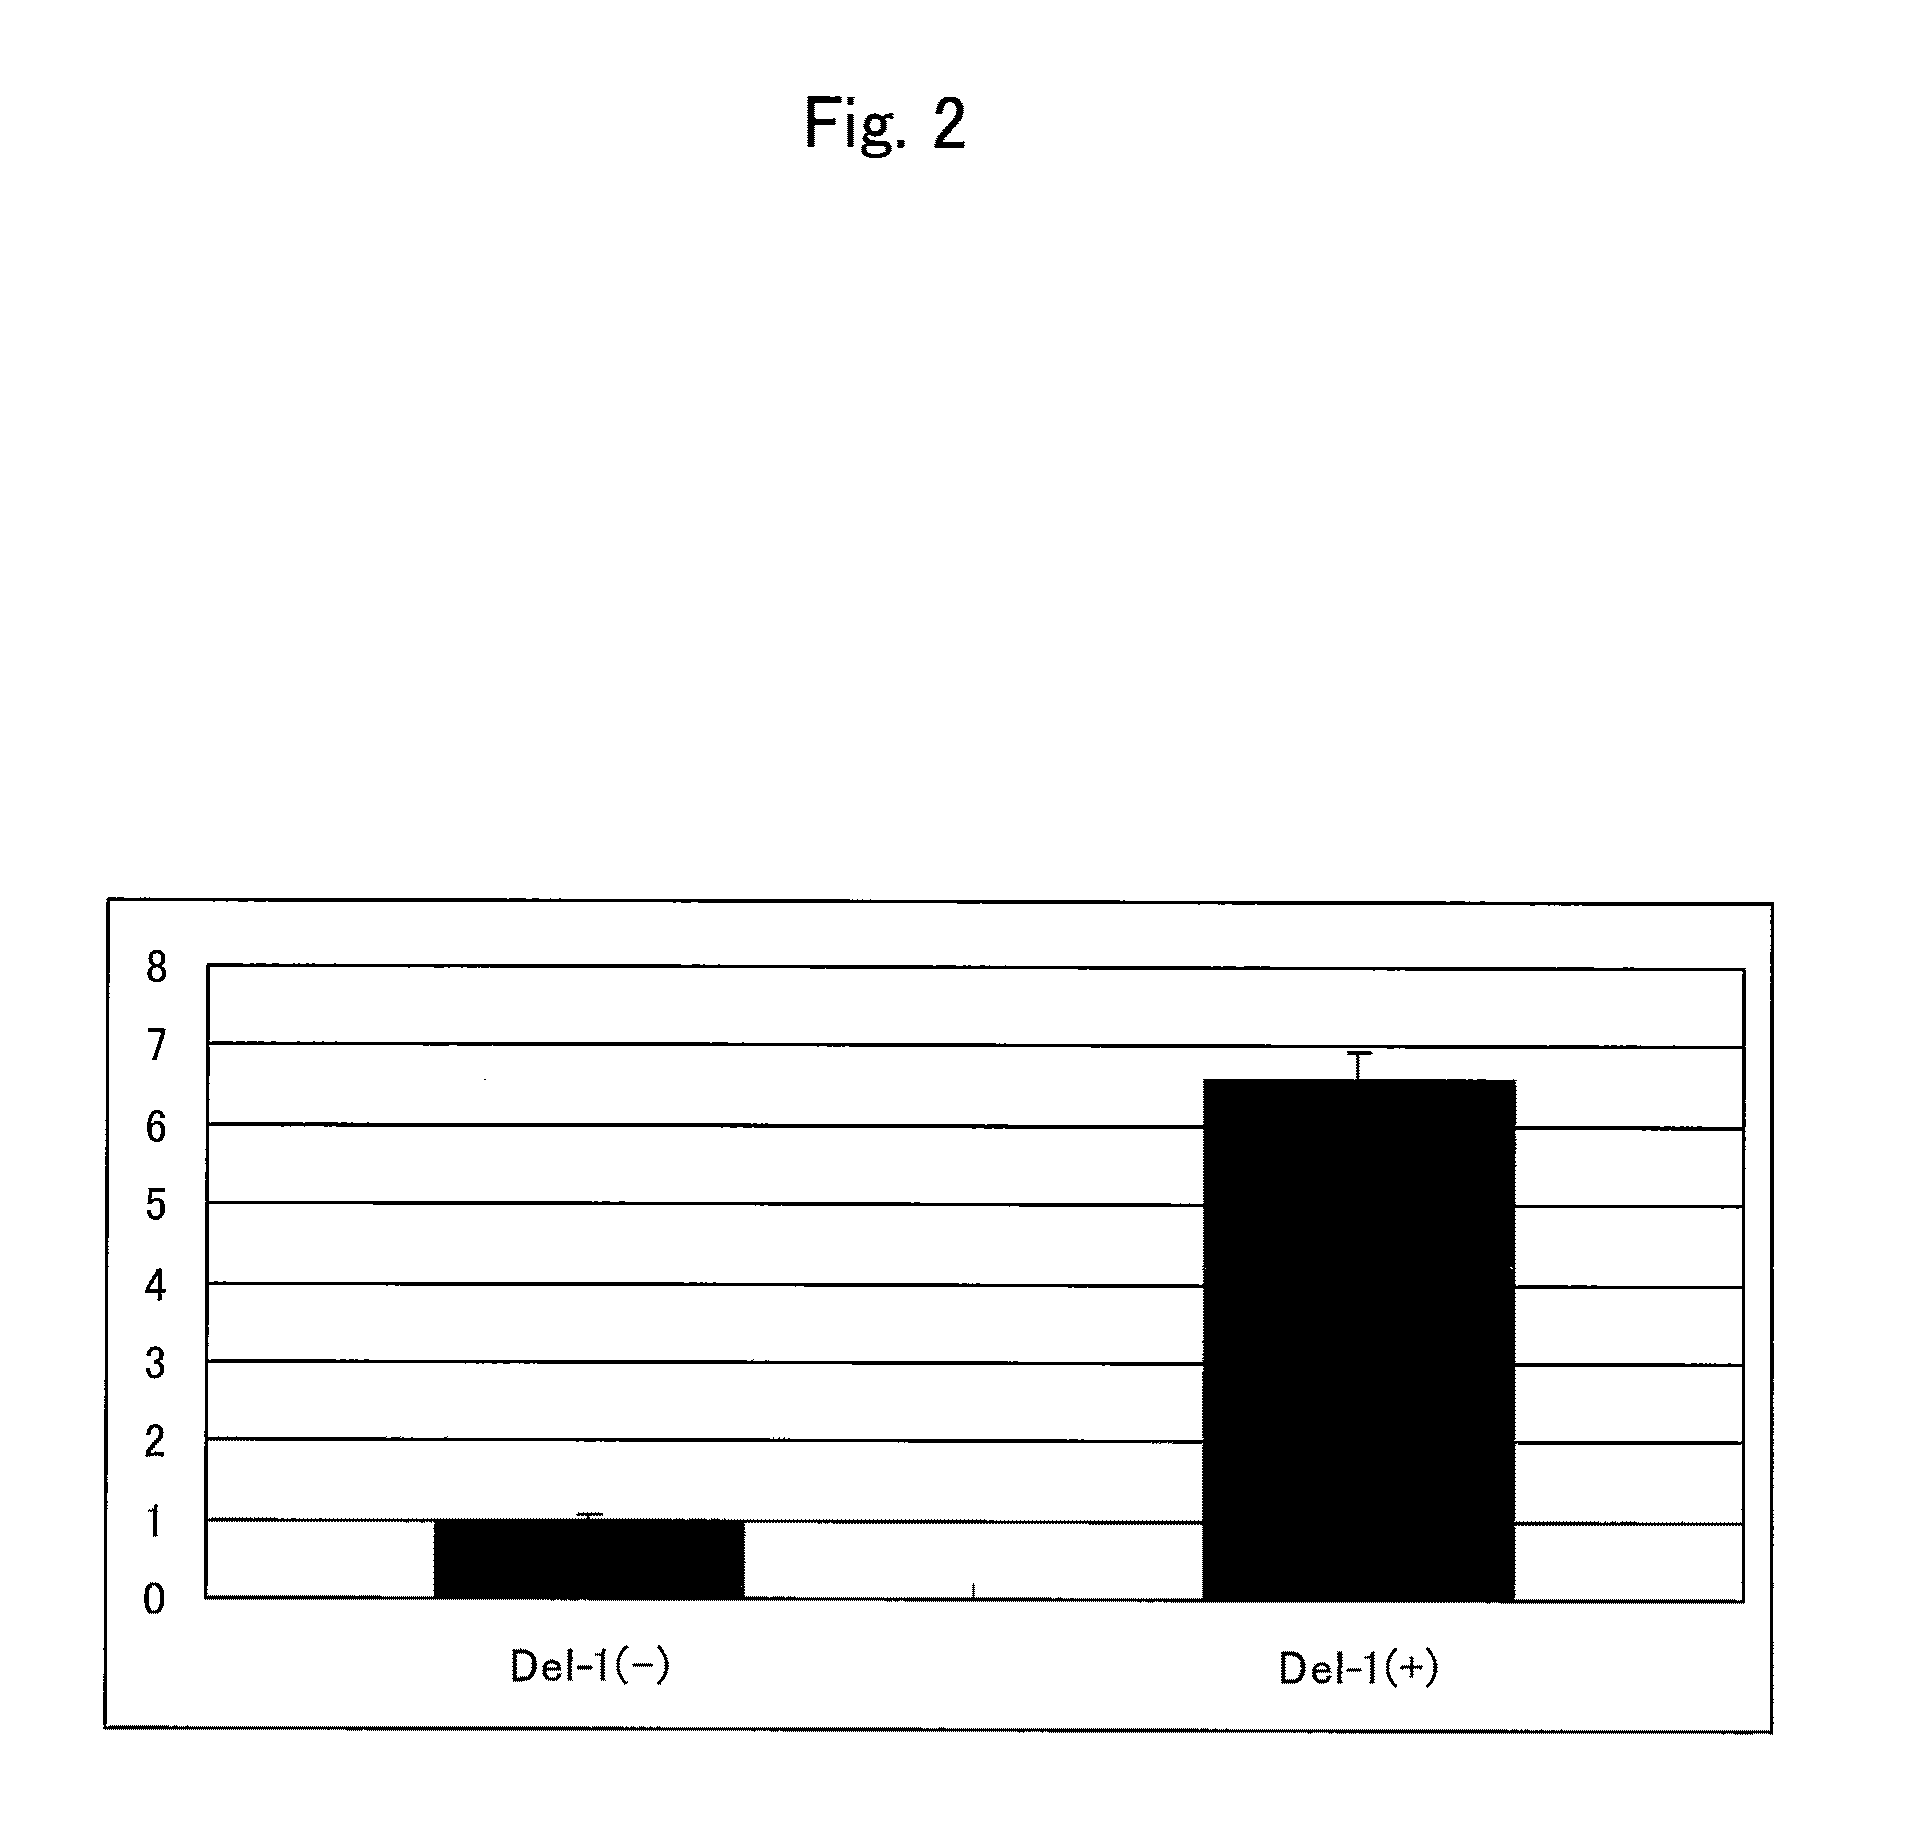 Auxiliary reagent for gene transfer